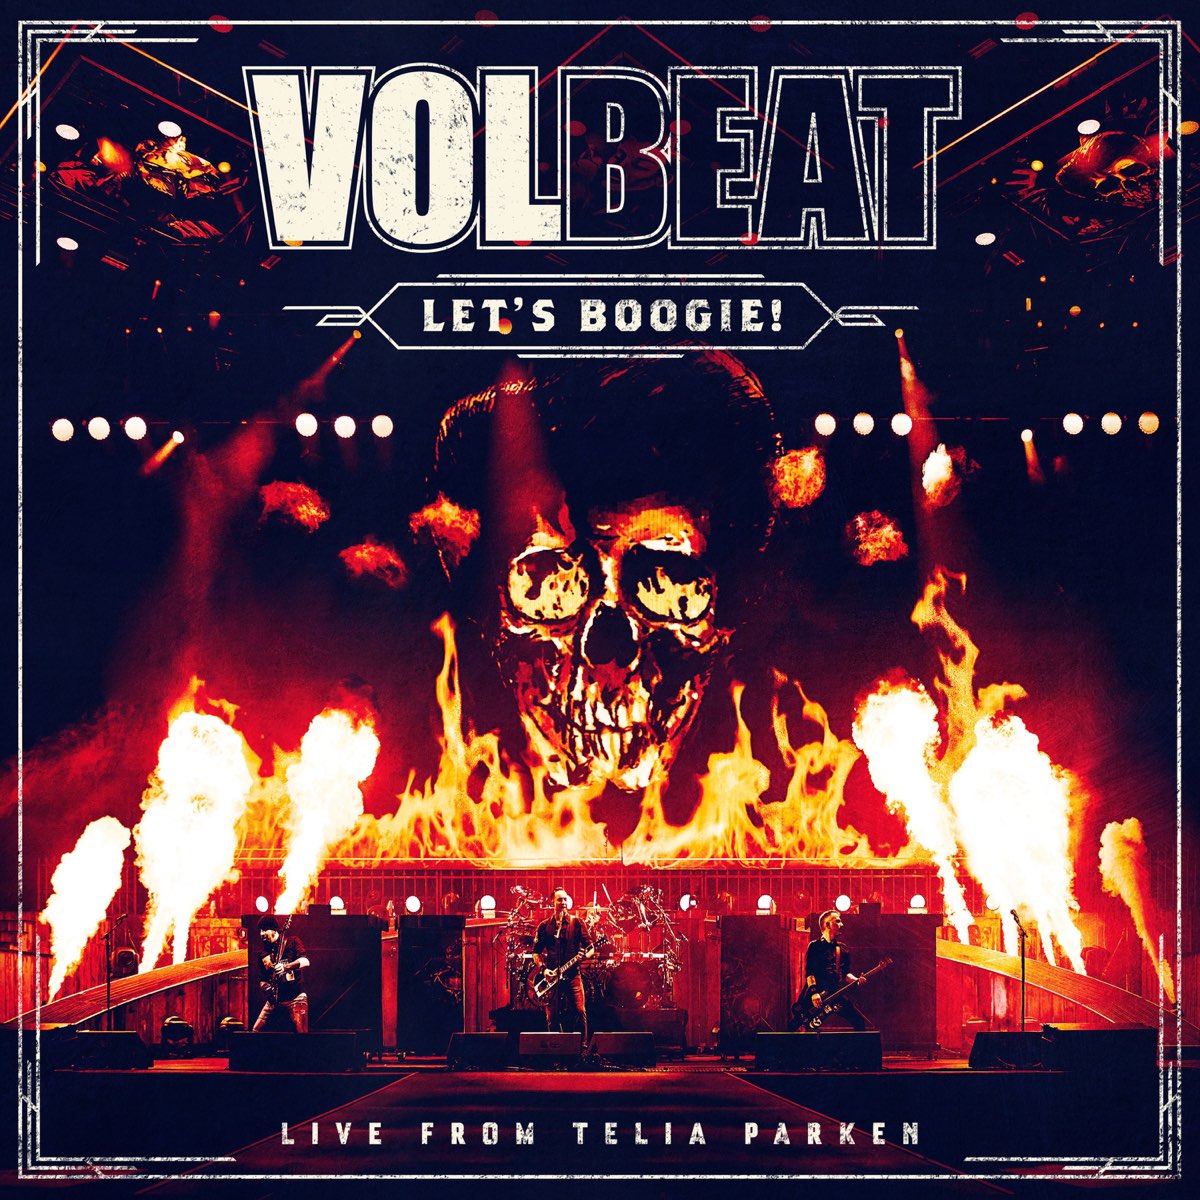 Let's Boogie! (Live from Telia Parken) by Volbeat on Apple Music